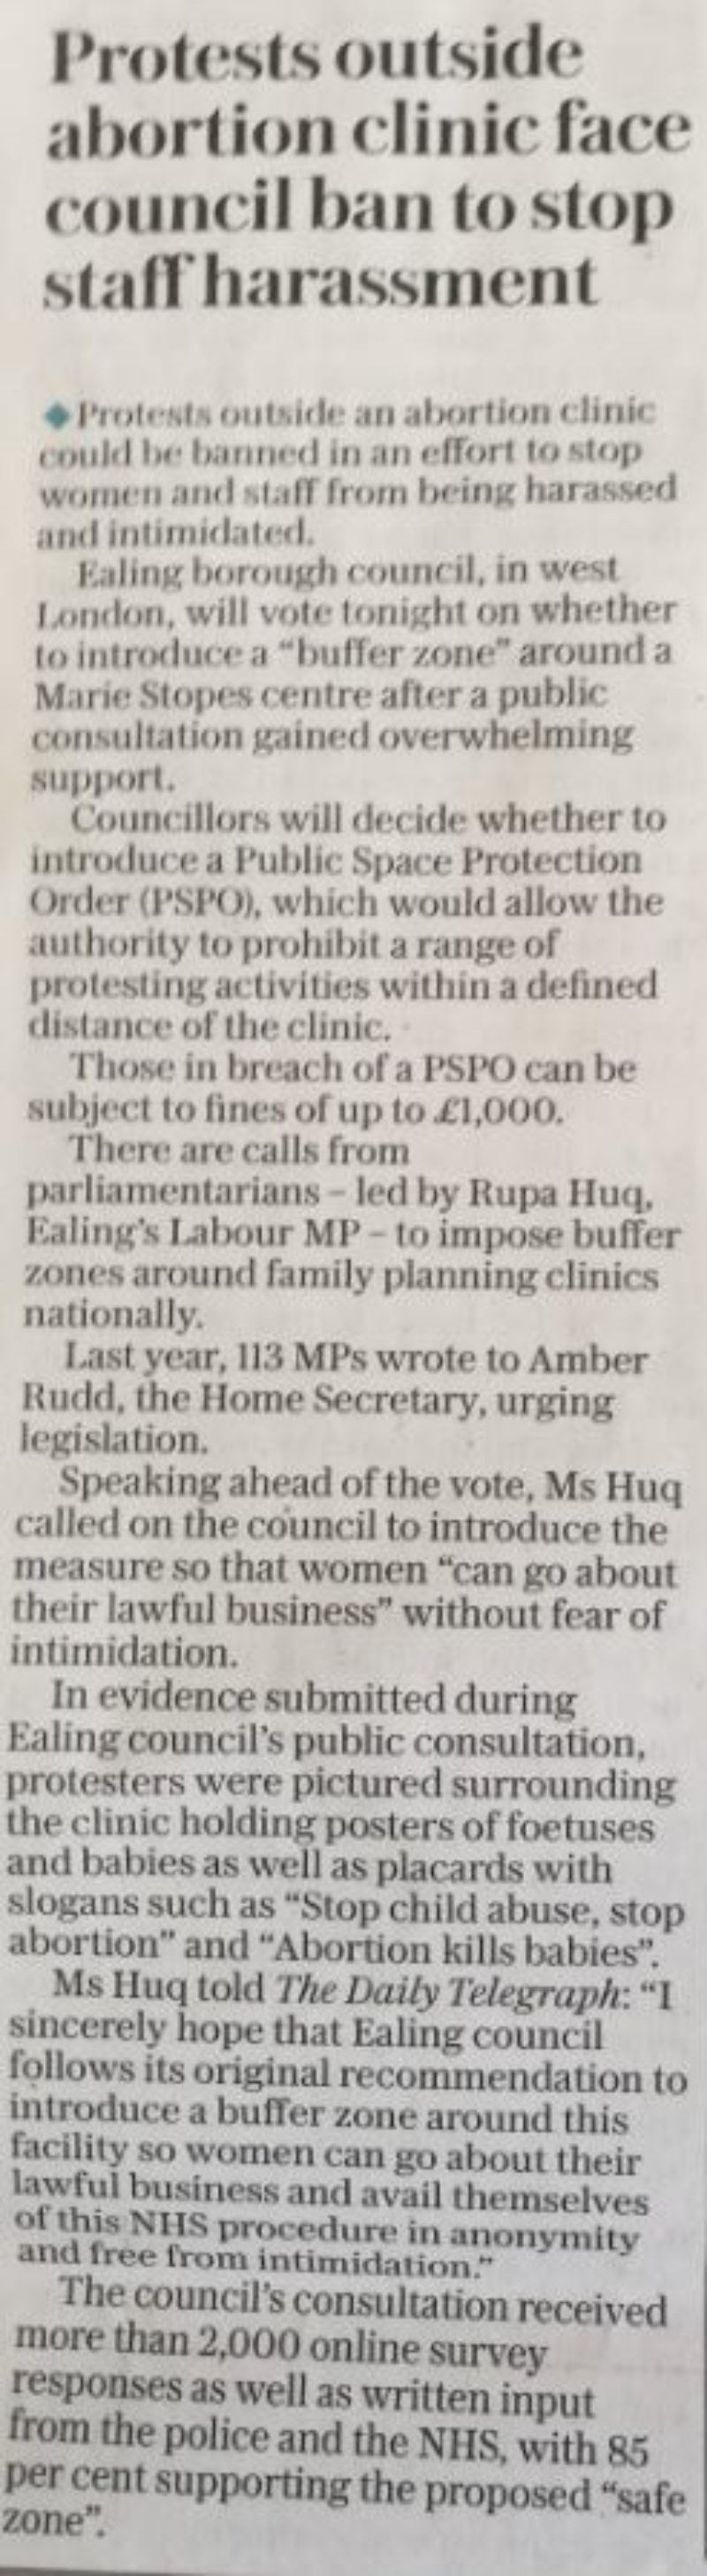 Protests outside abortion clinic face council ban to stop harassment - The Telegraph - 10th April 2018.